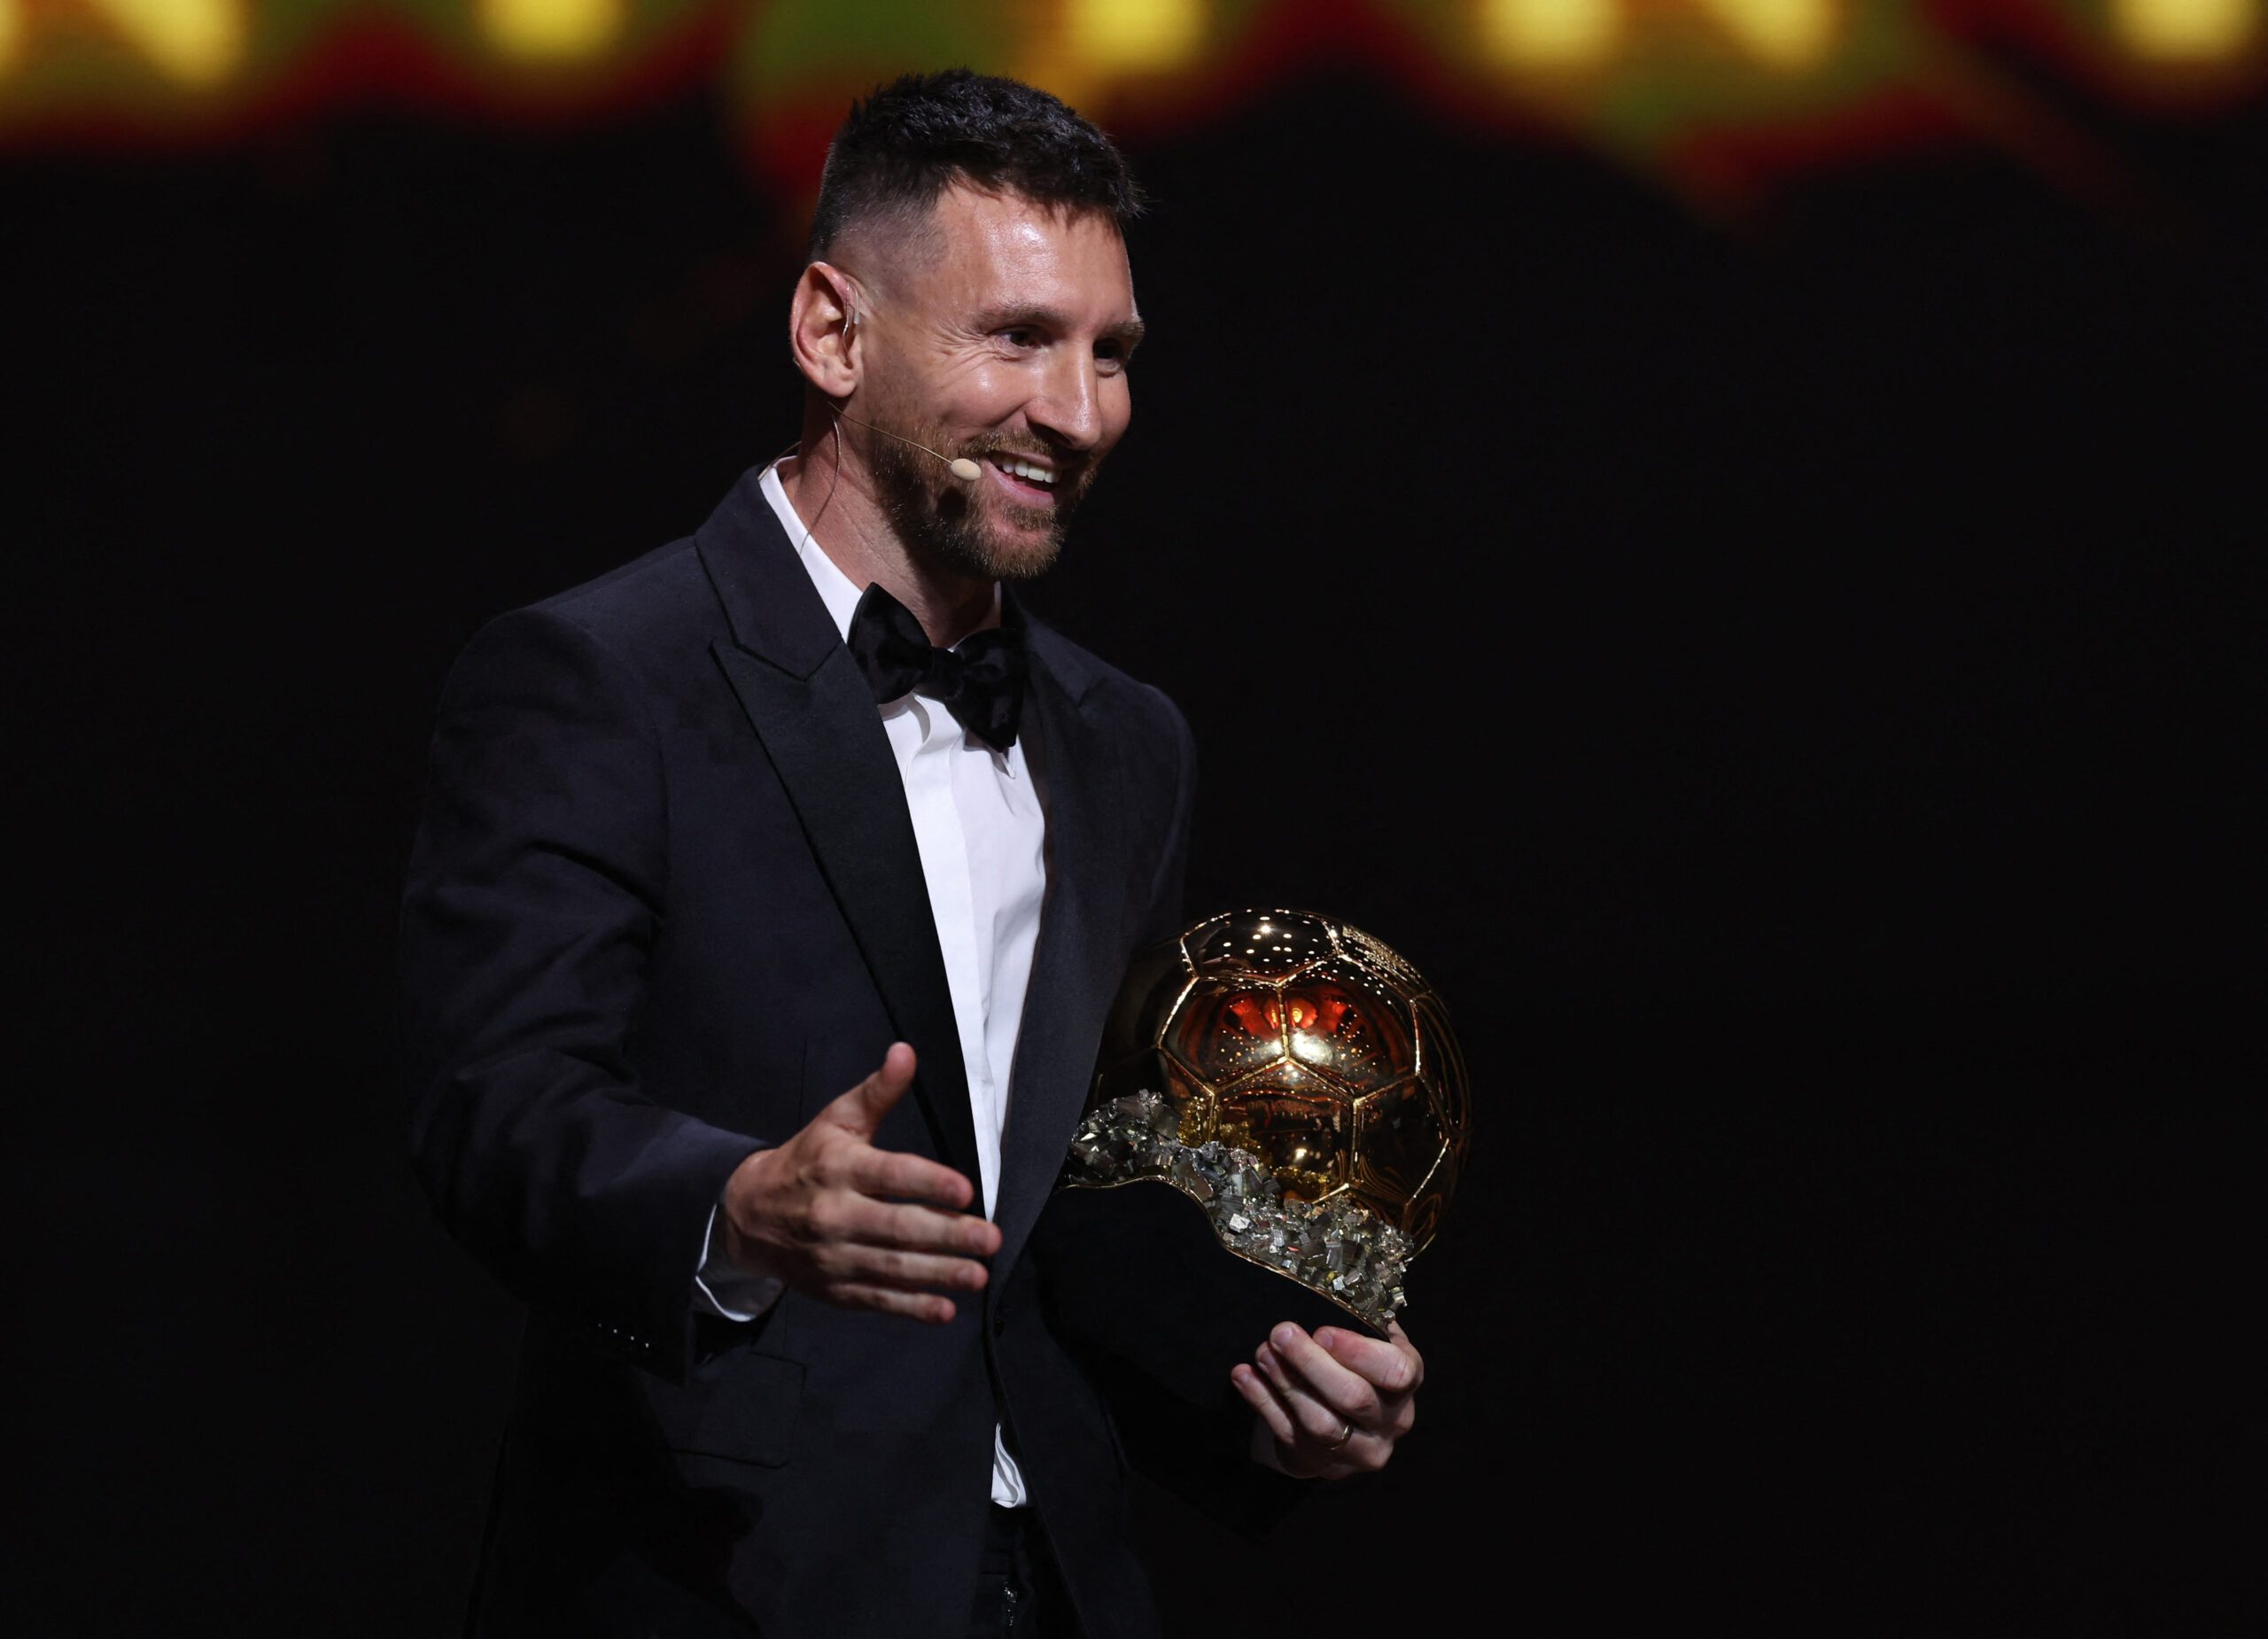 Rare air: Lionel Messi wins record eighth Ballon d’Or for best player in the world